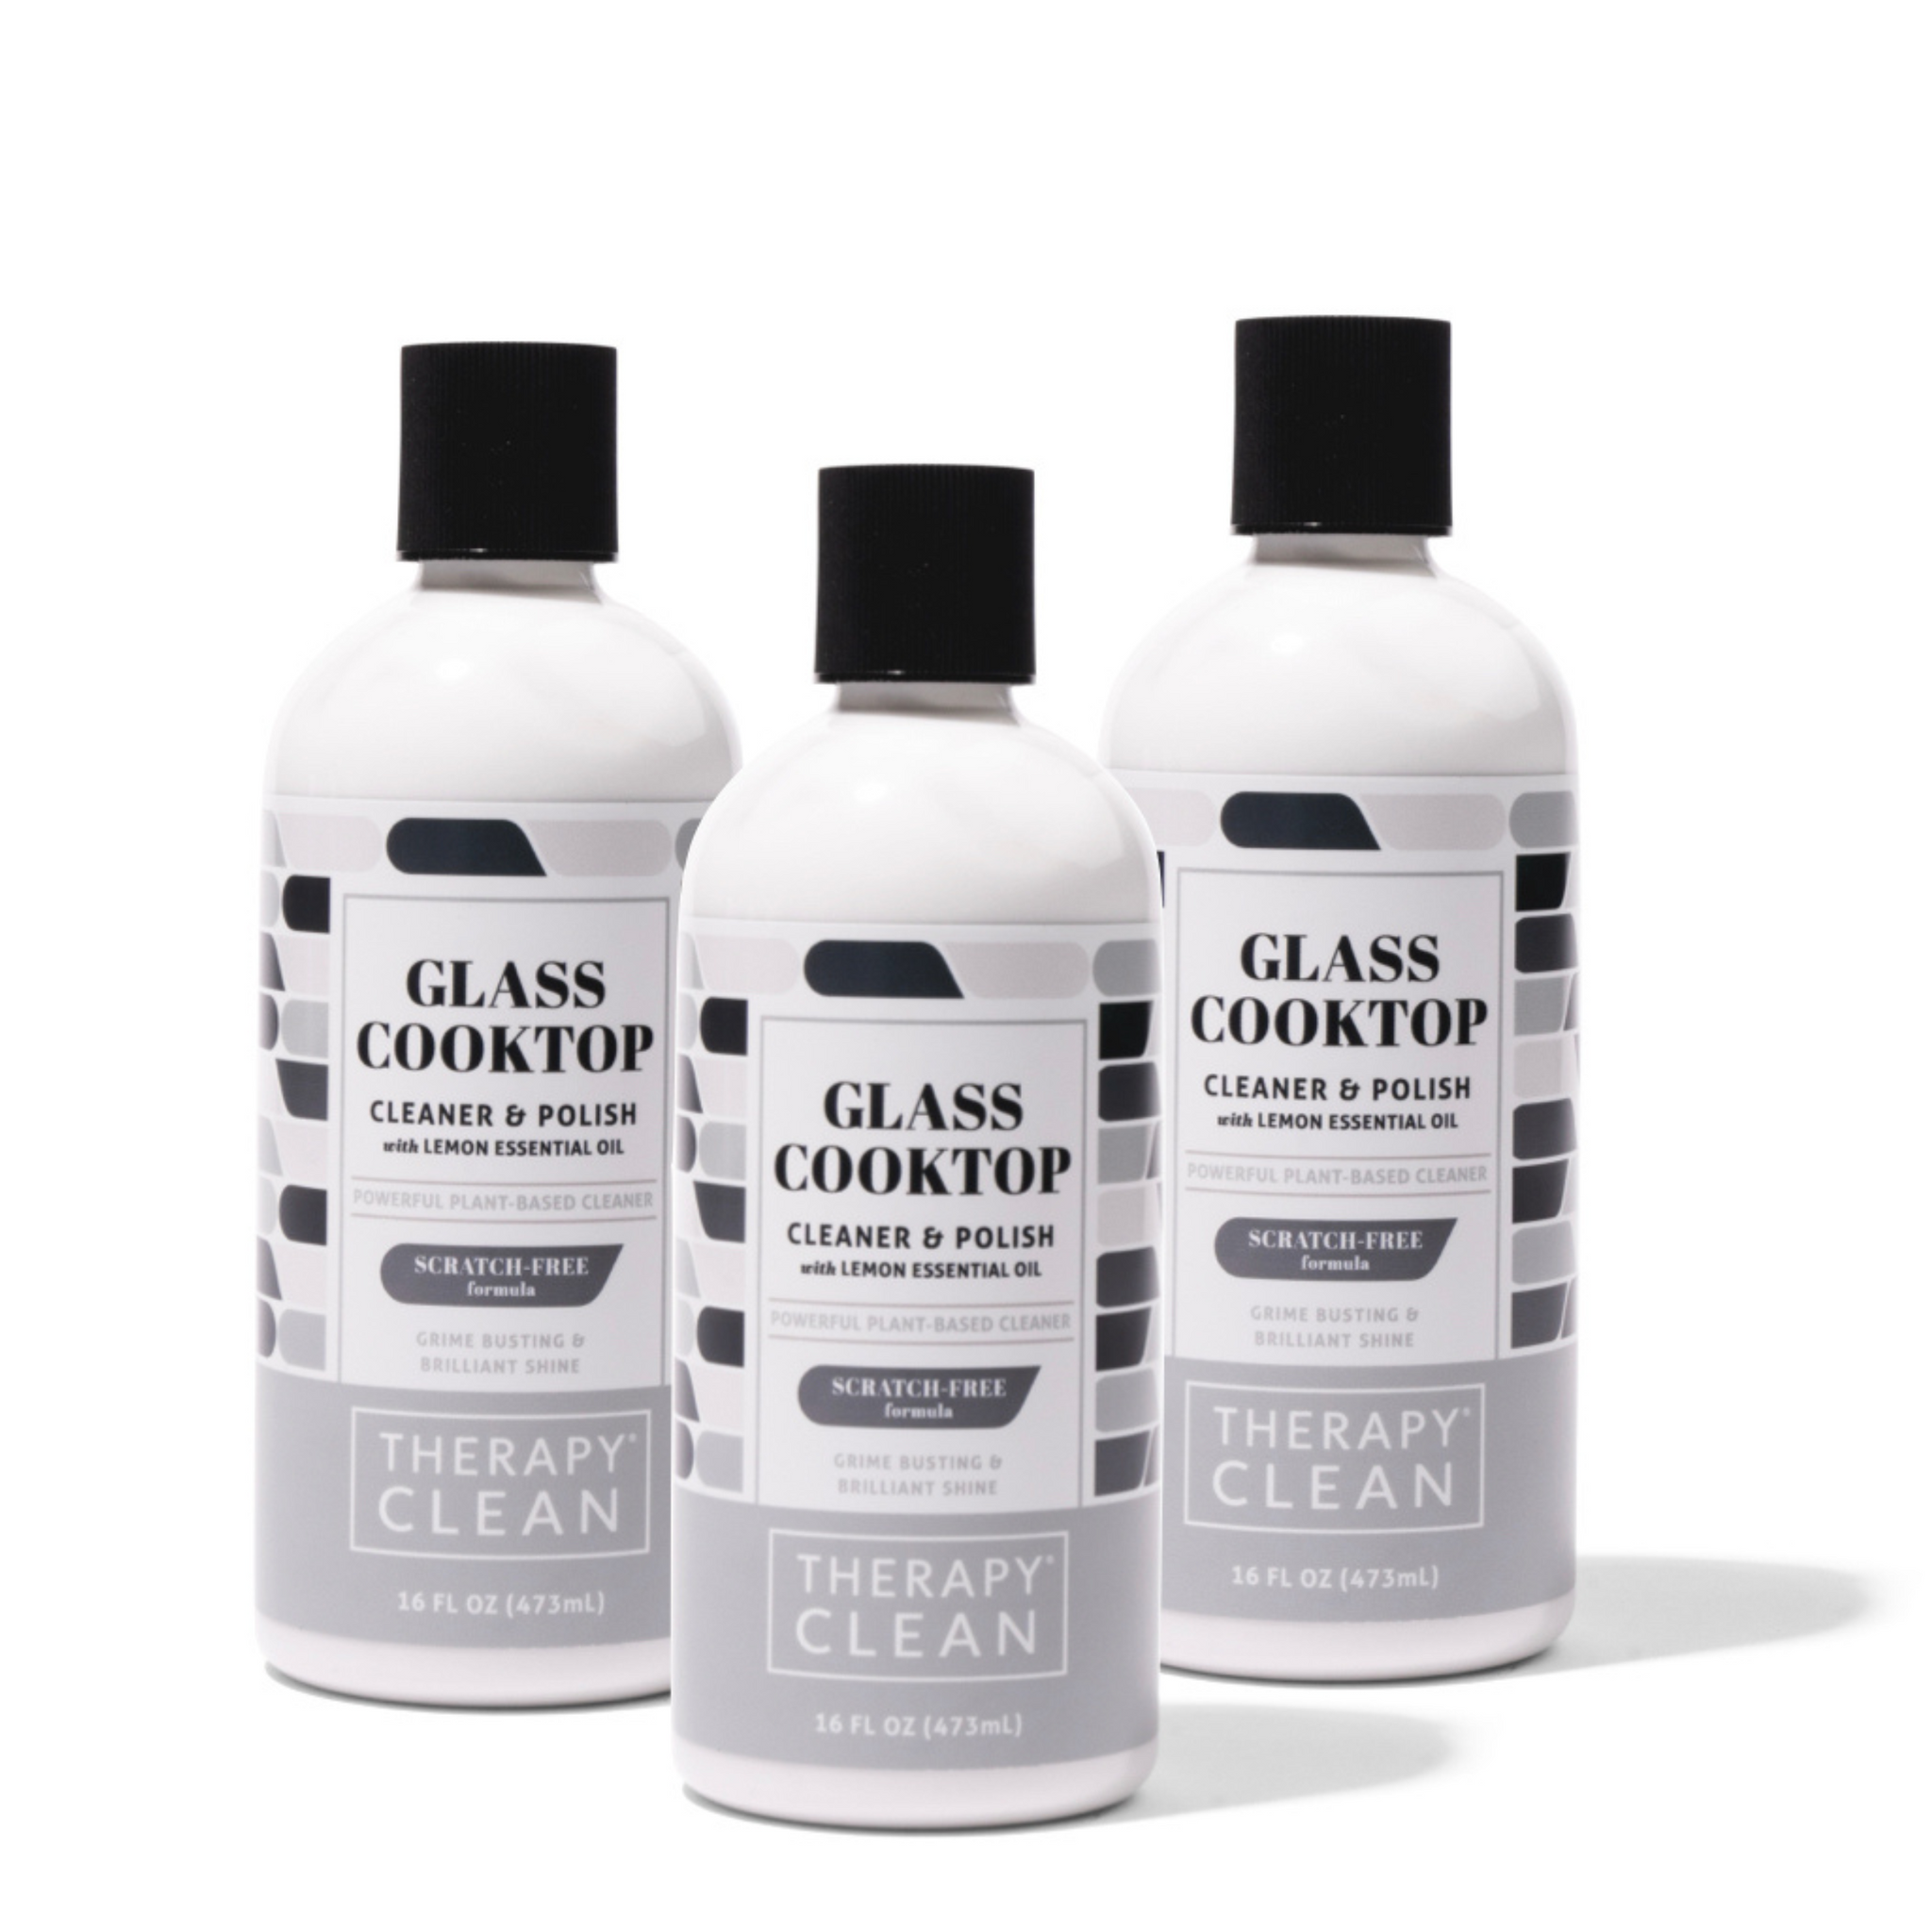 Goddard's Glass Cooktop Cleaner – Non-Abrasive Glass Cleaner for